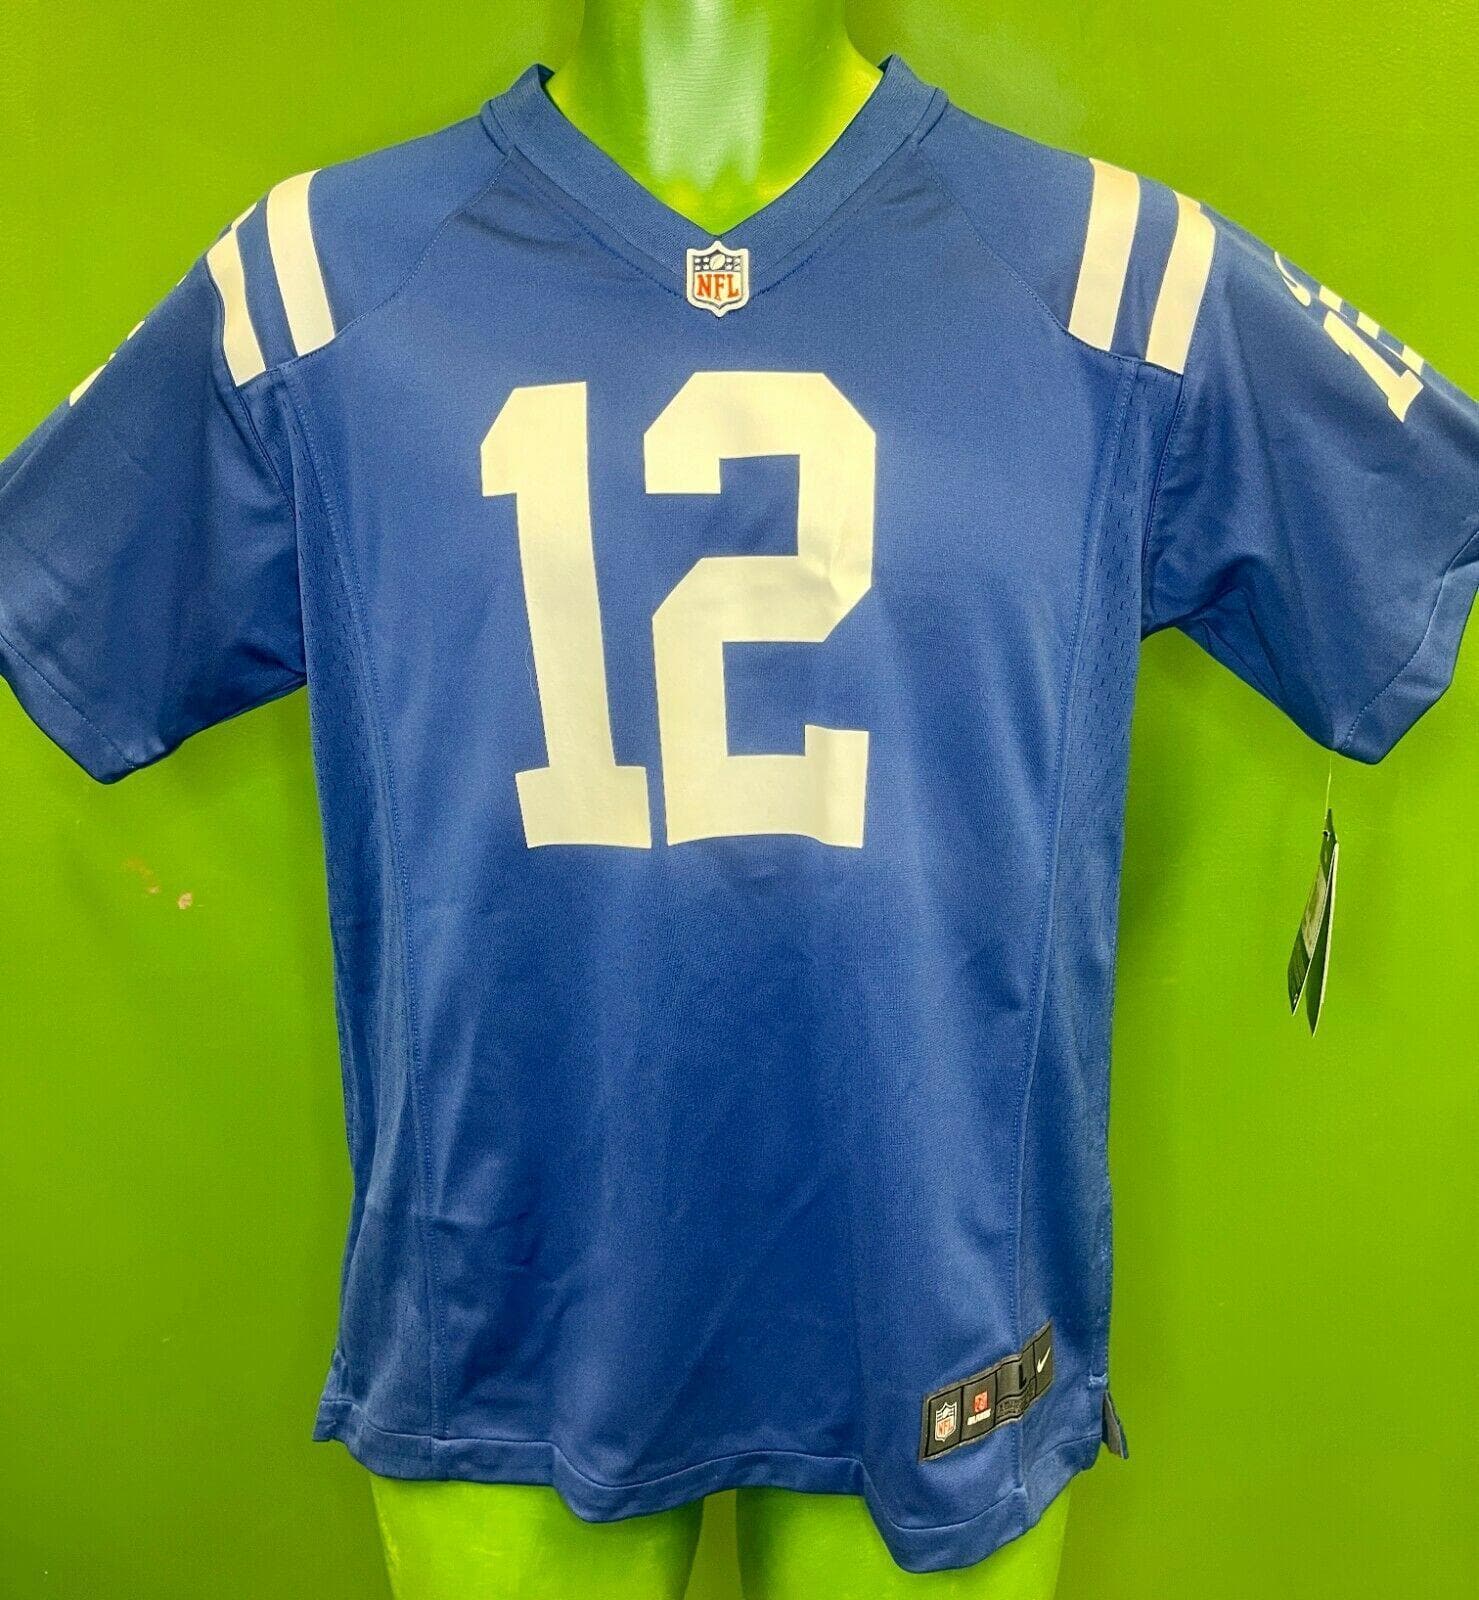 NFL Indianapolis Colts Luck #12 Game Jersey Youth Large 14-16 NWT